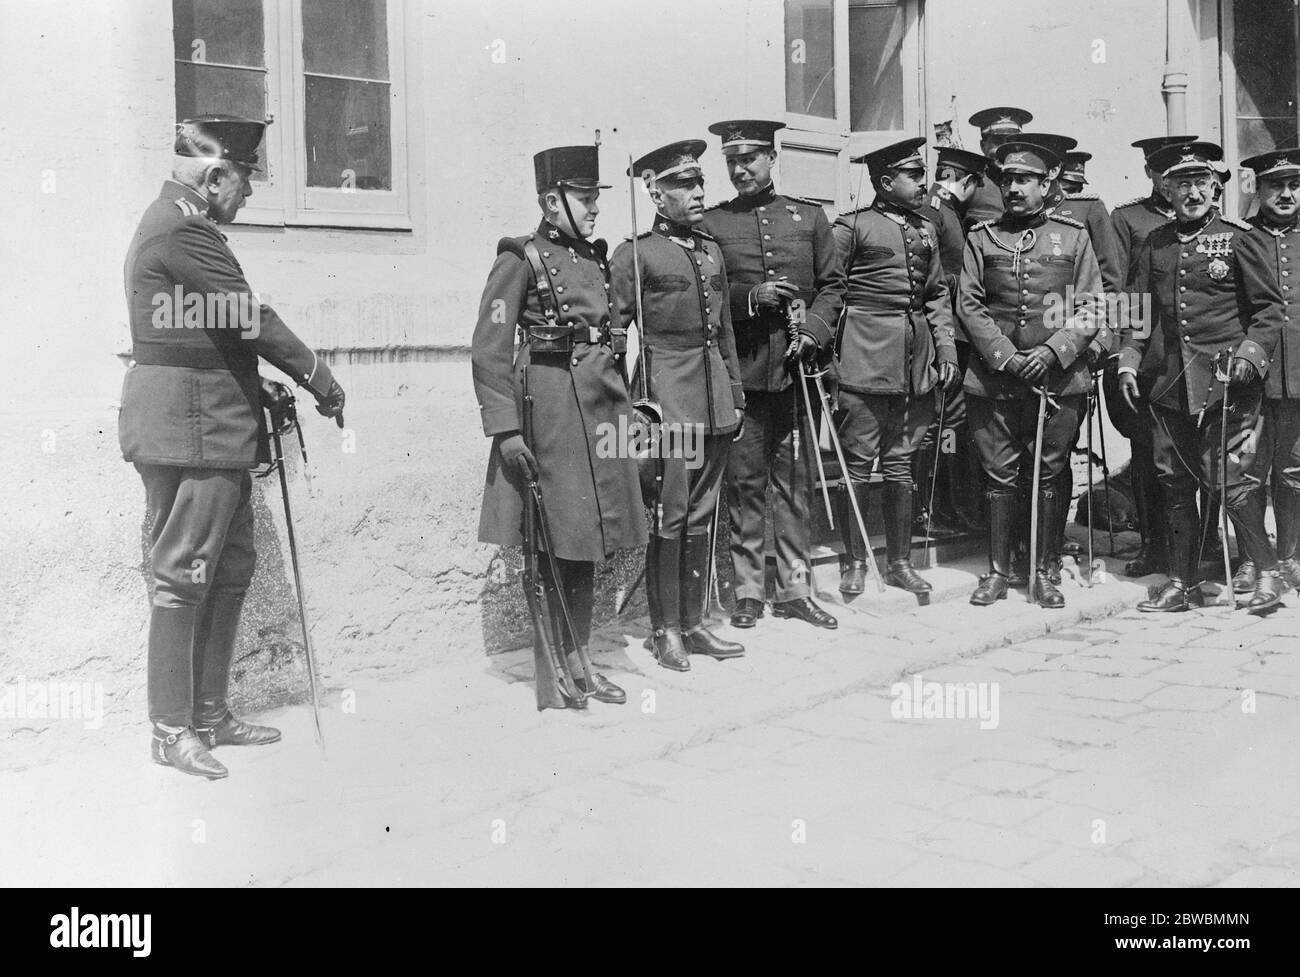 Spanish Crown Prince as Corporal The Prince of the Asturias , Heir ro the Spanish Throne , paraded as a corporal with the King ' s Immemorial Regiment when it was taken over by a new commanding officer in Madrid  The Crown prince left , next to his commanding officer Don Jose Gobartt , The third figure is General SAaro  13 August 1922 Stock Photo